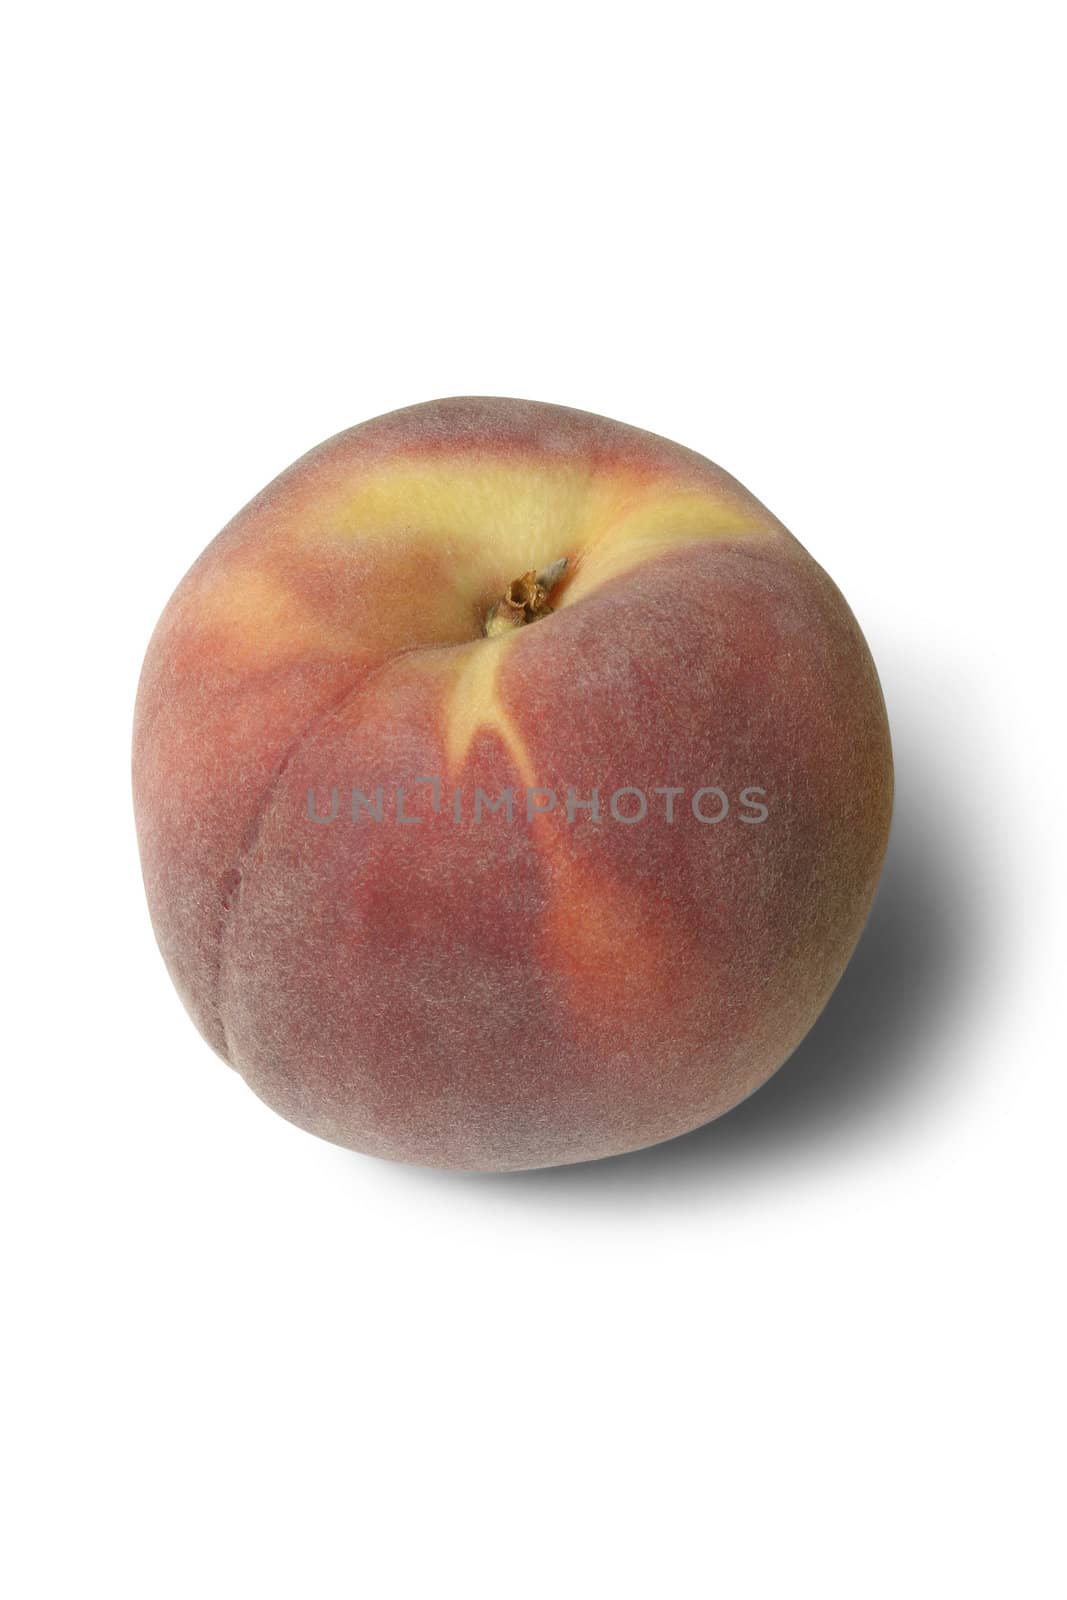 Peach on a white background